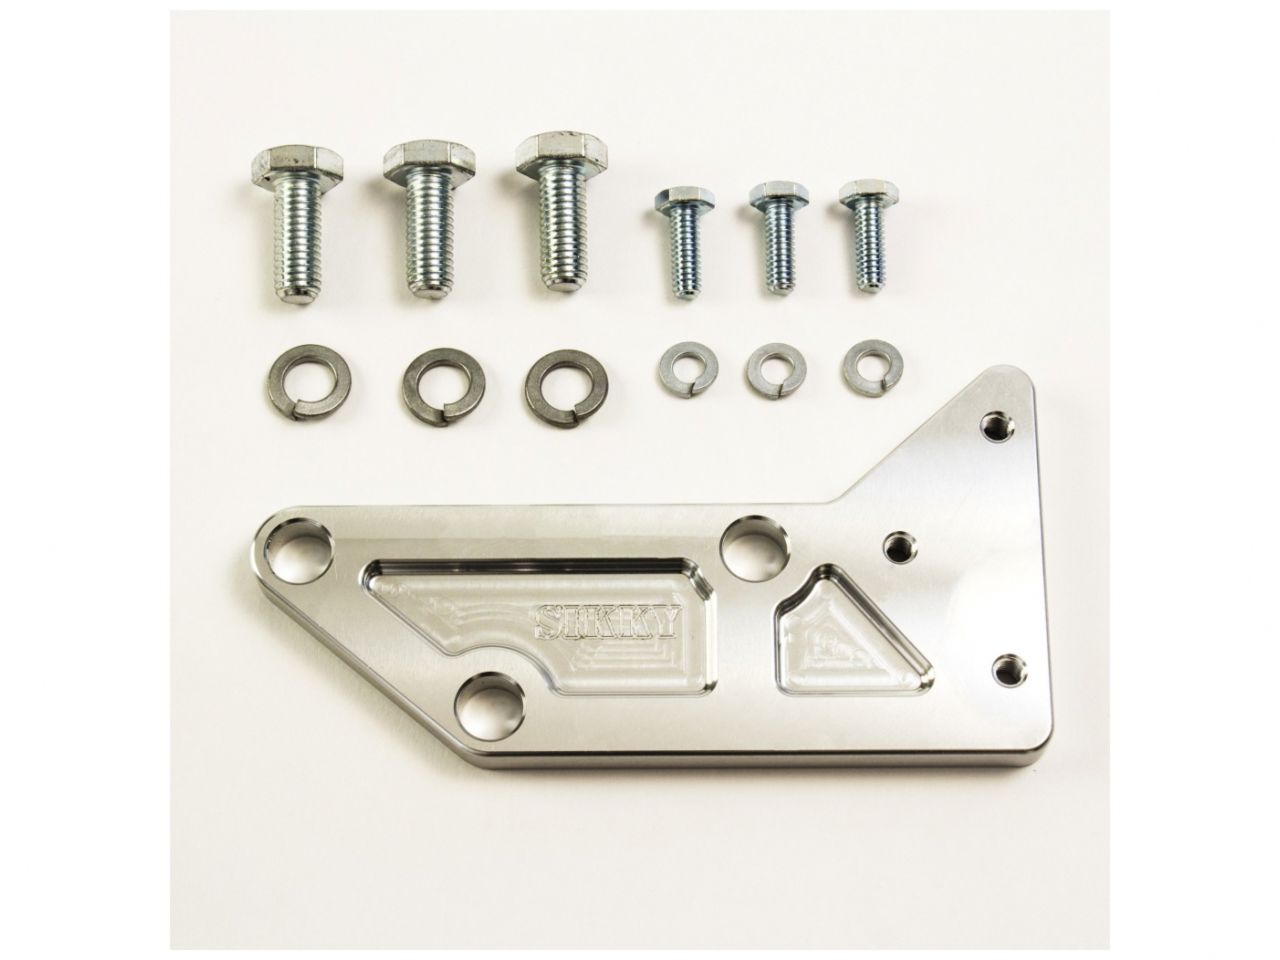 Sikky Mounting Bracket Kit for Oil Filter Relocation